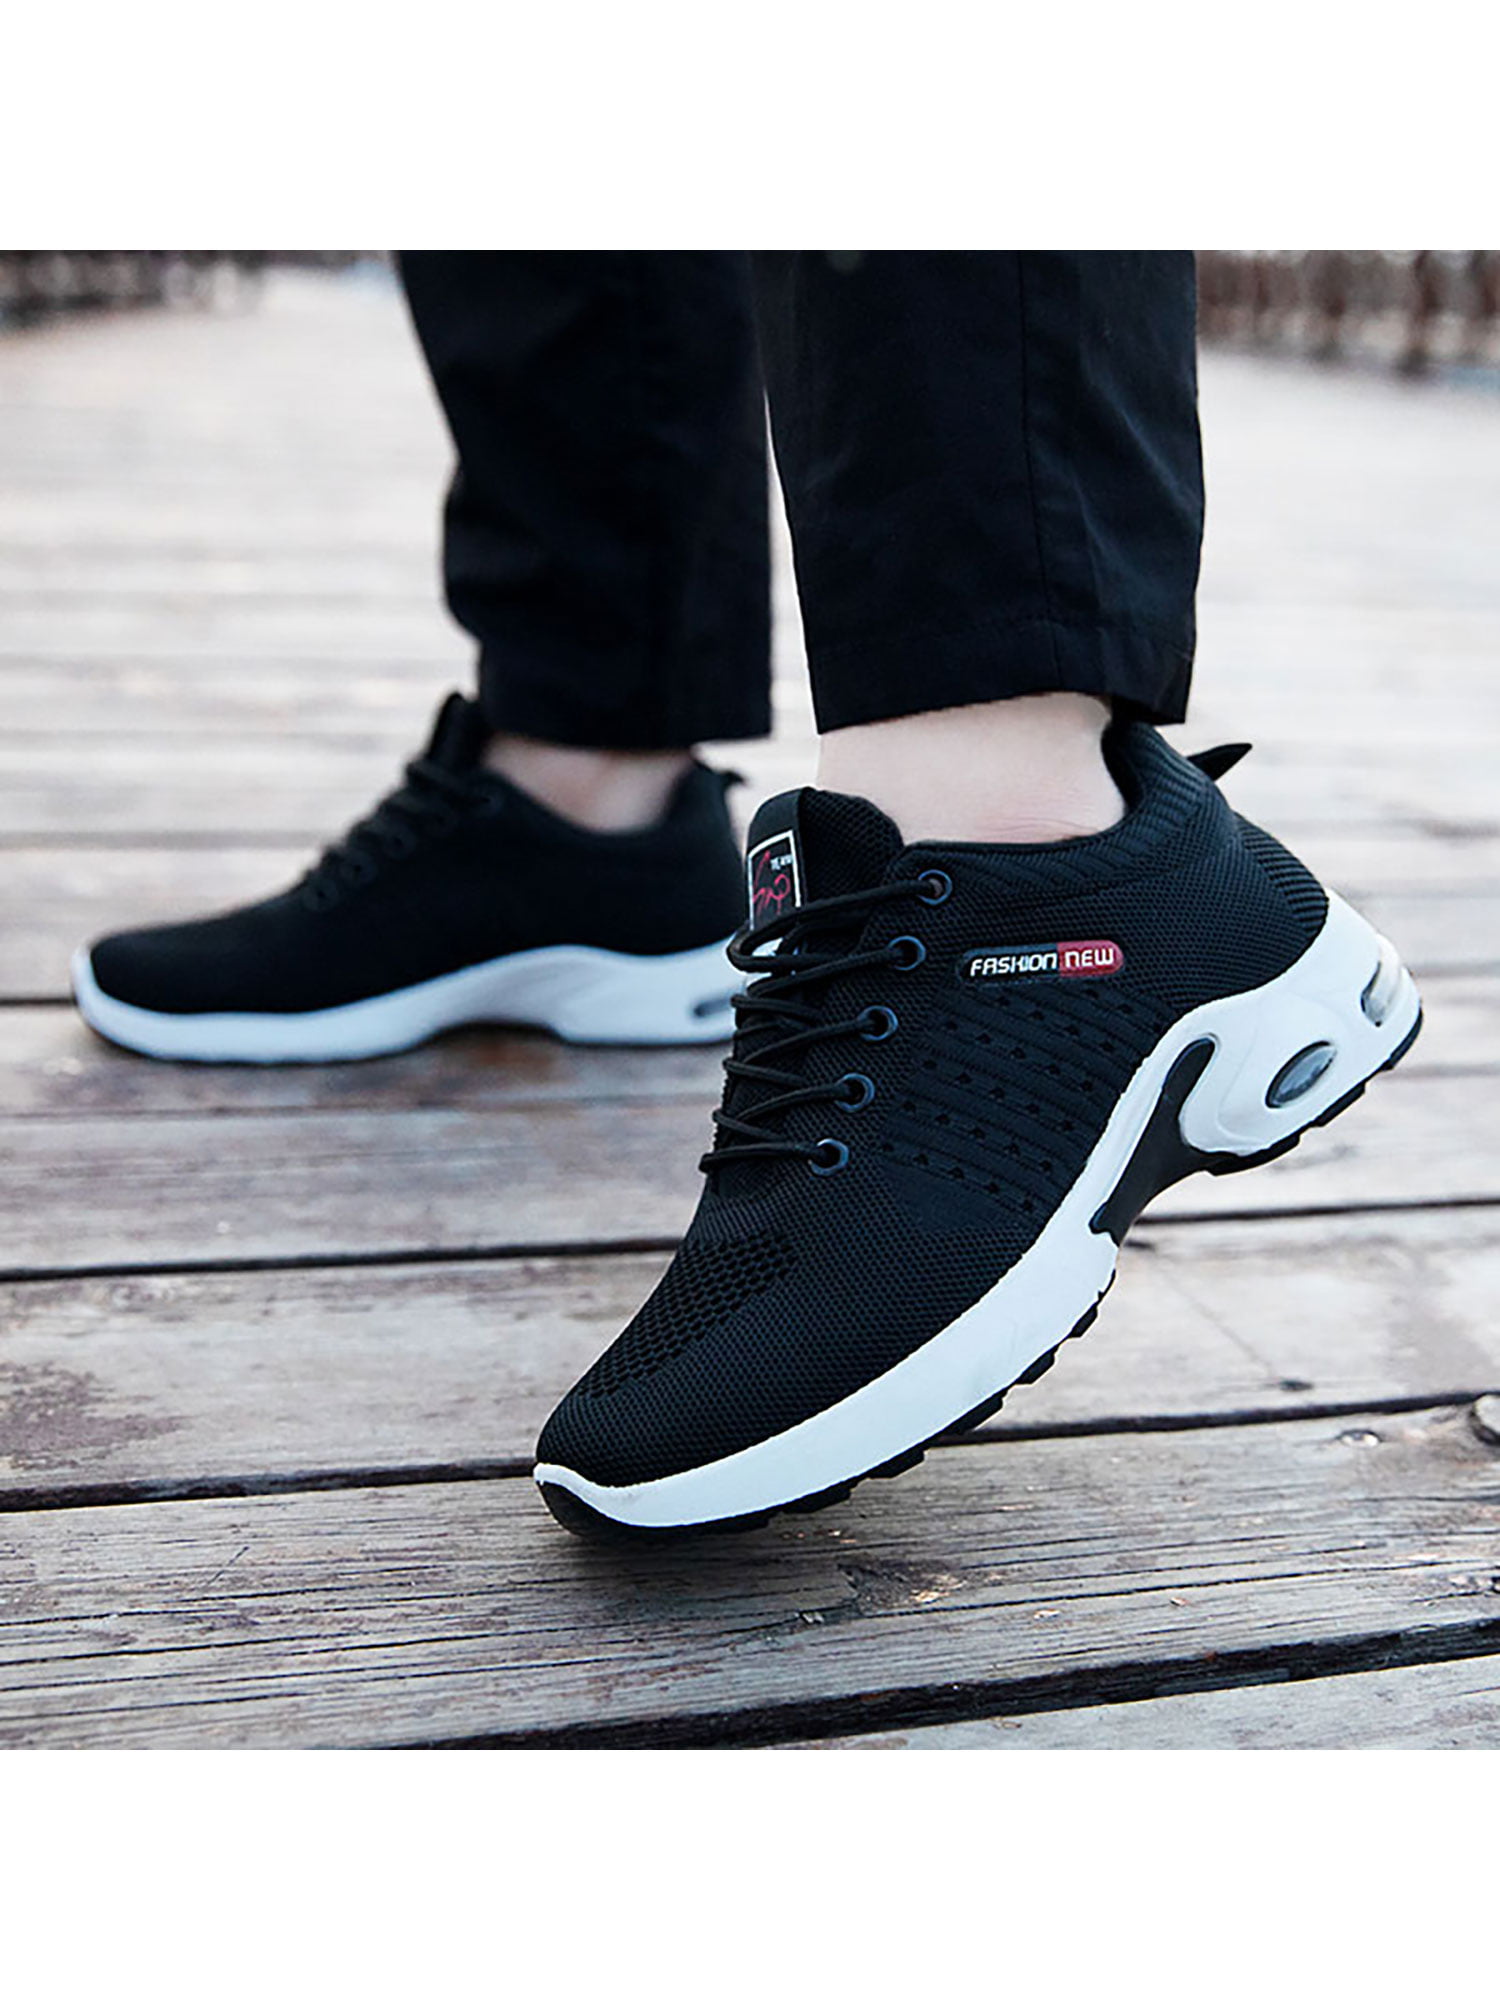 Men's Athletic Shoes Running Outdoor Casual Trainers Tennis Jogging Sneakers Gym 